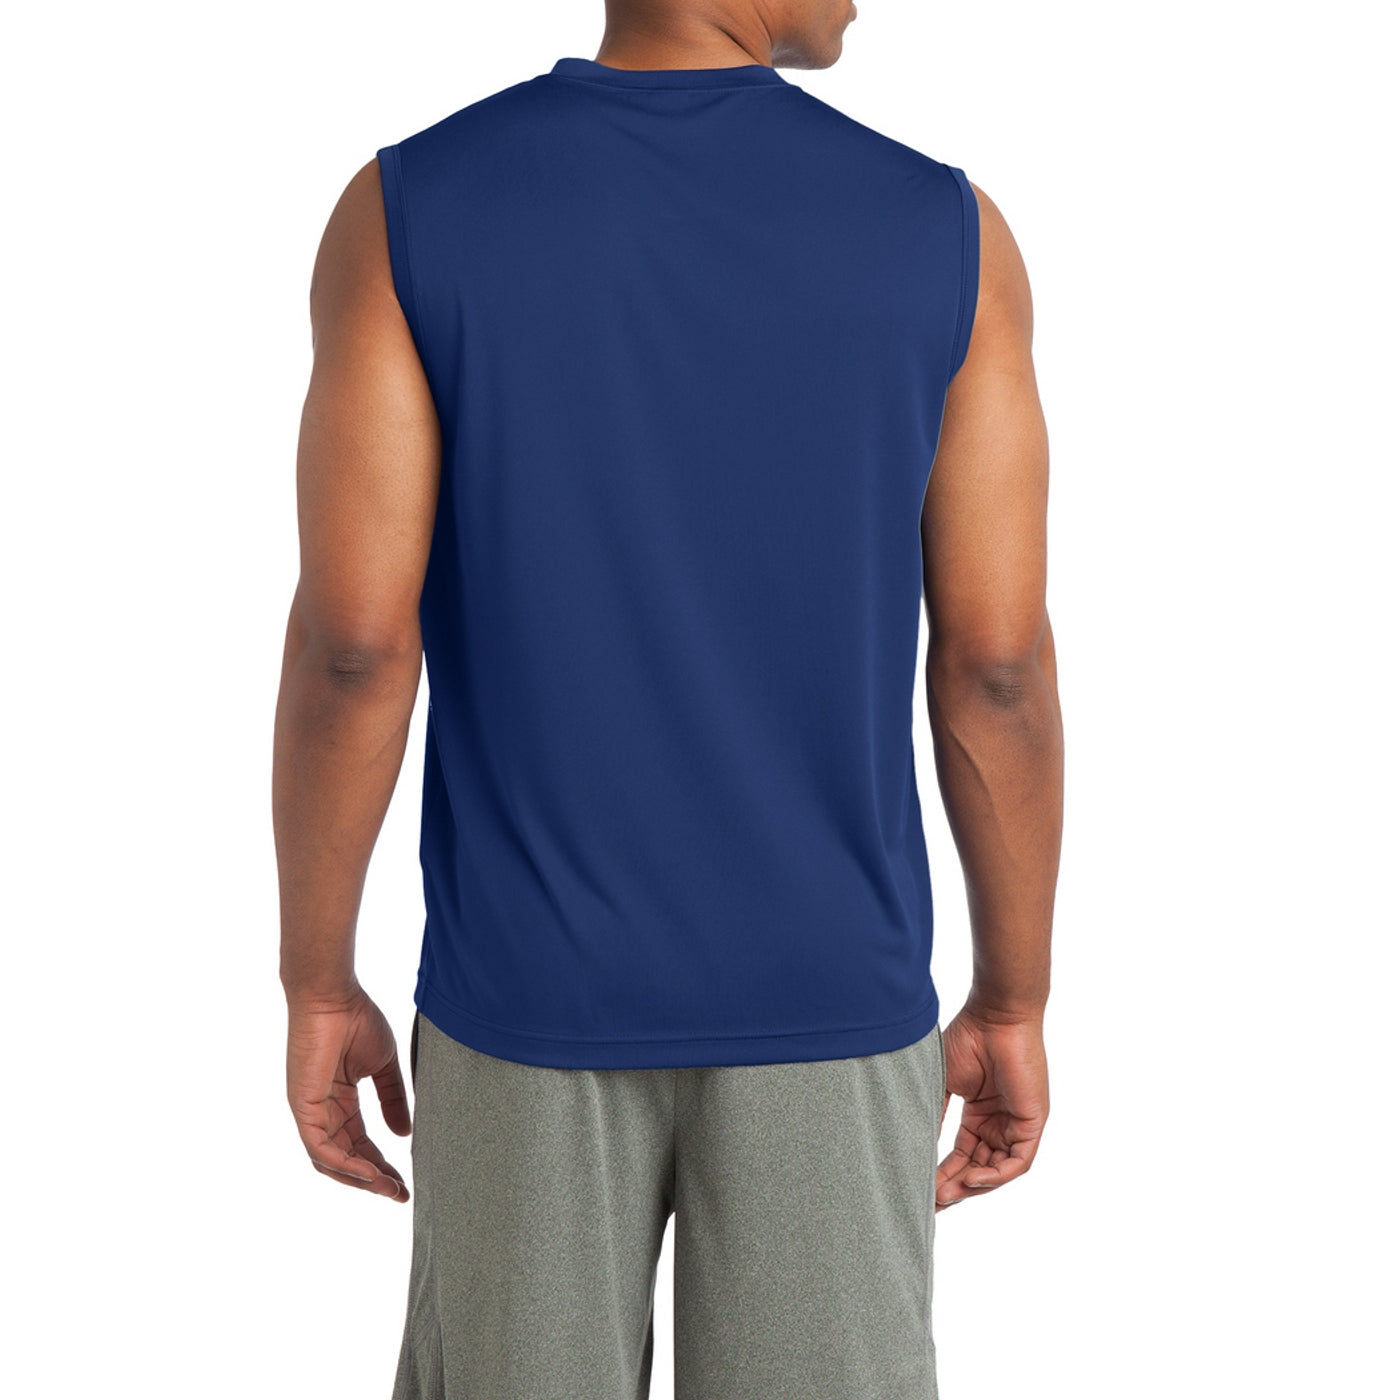 Sleeveless PosiCharge Competitor Tee - True Royal